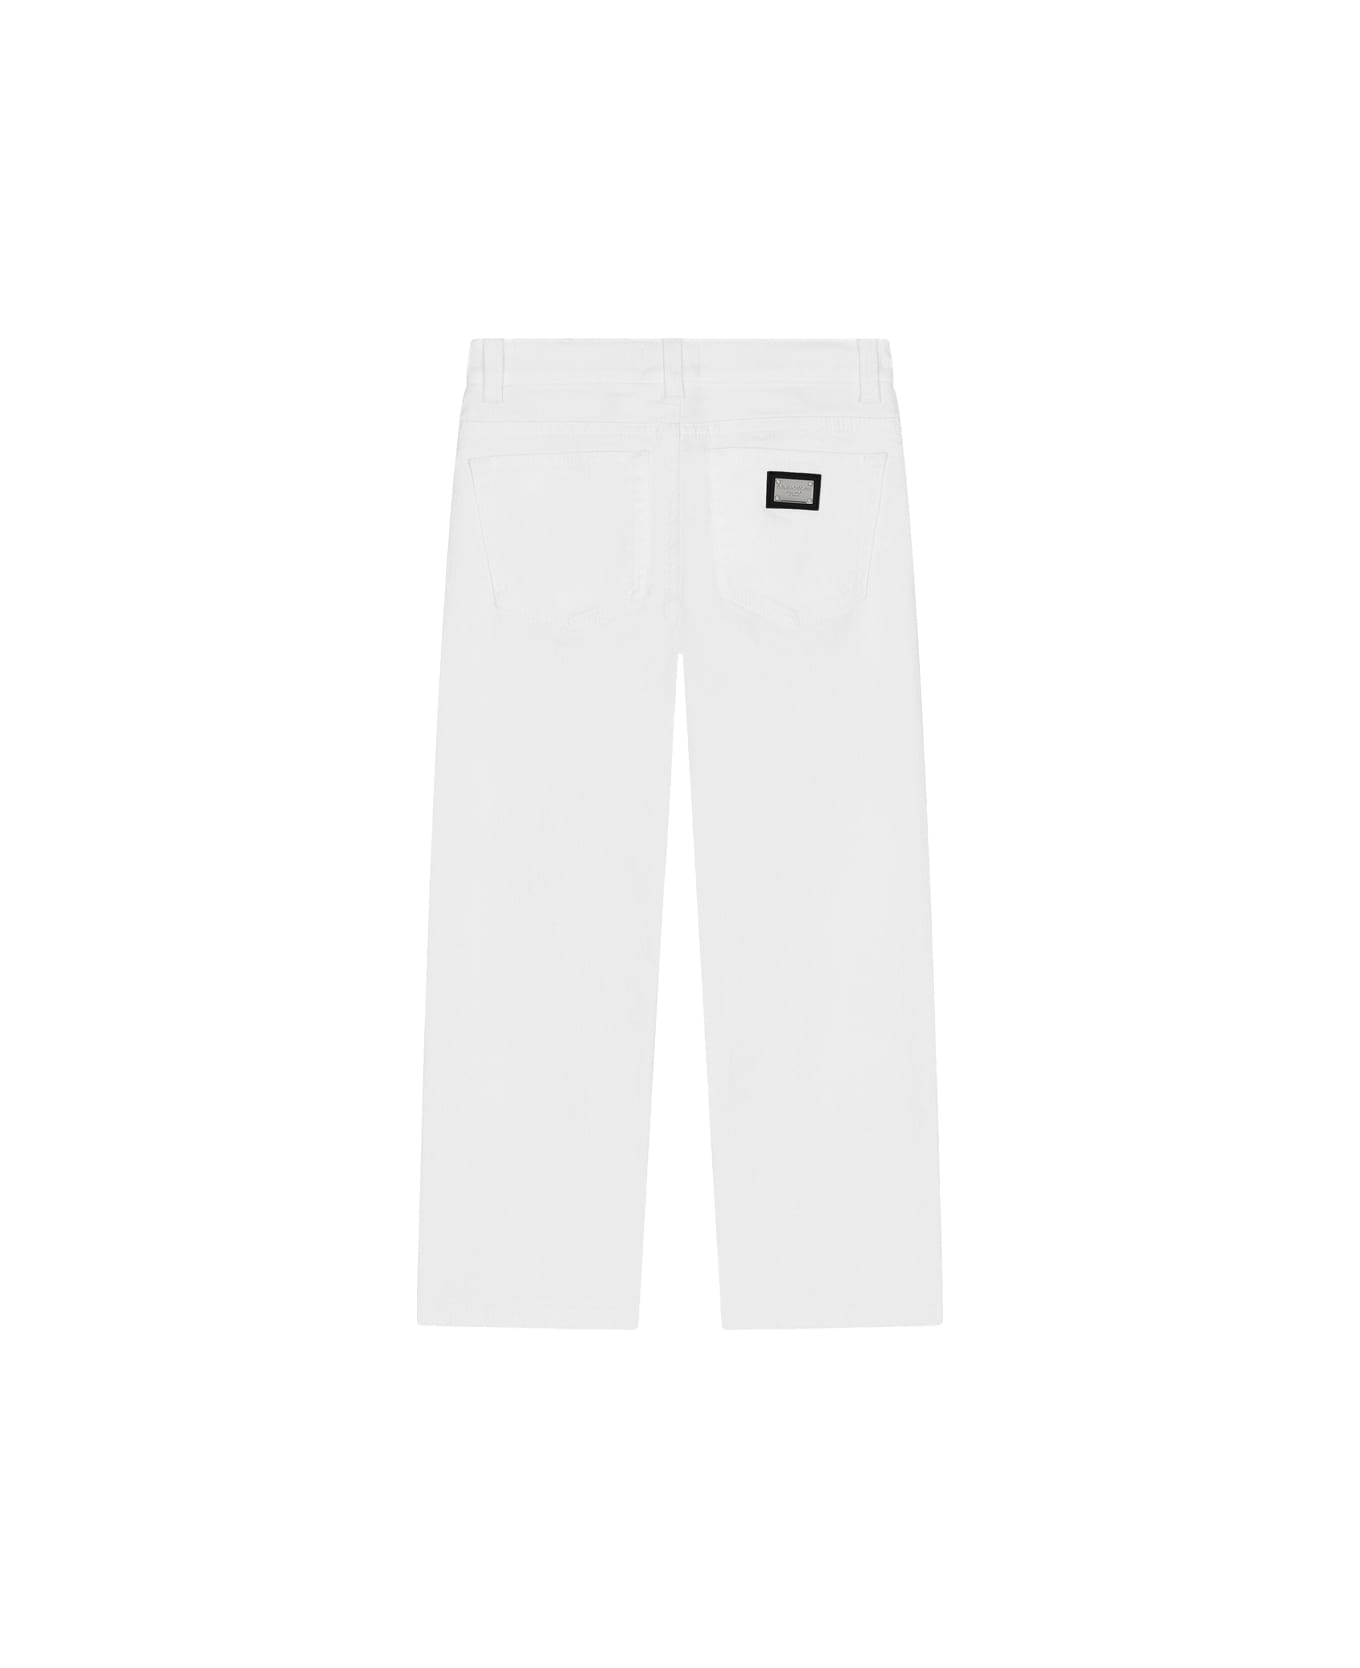 Dolce & Gabbana 5 Pocket White Denim Trousers With Tears - White